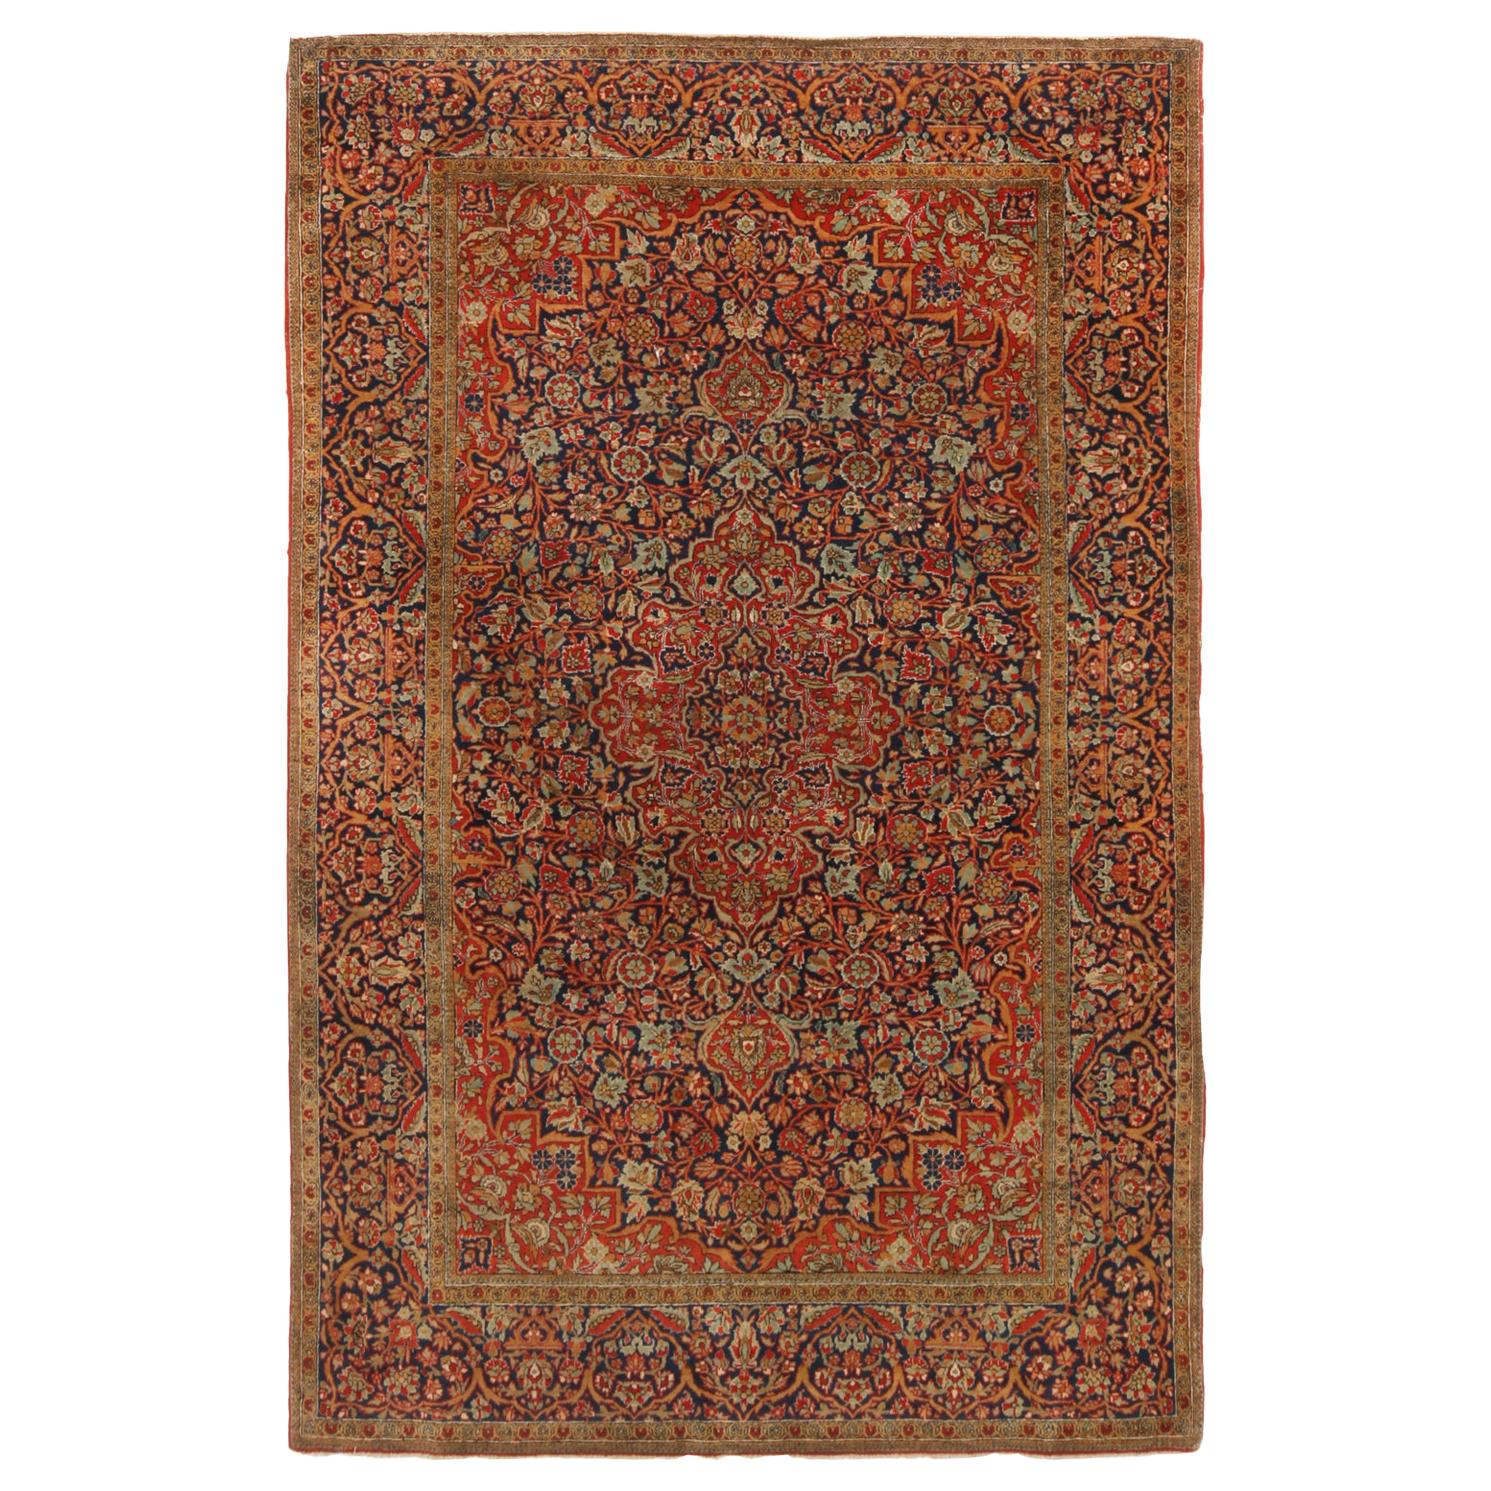 Antique Kashan Traditional Rug in Red and Blue Floral Pattern by Rug & Kilim